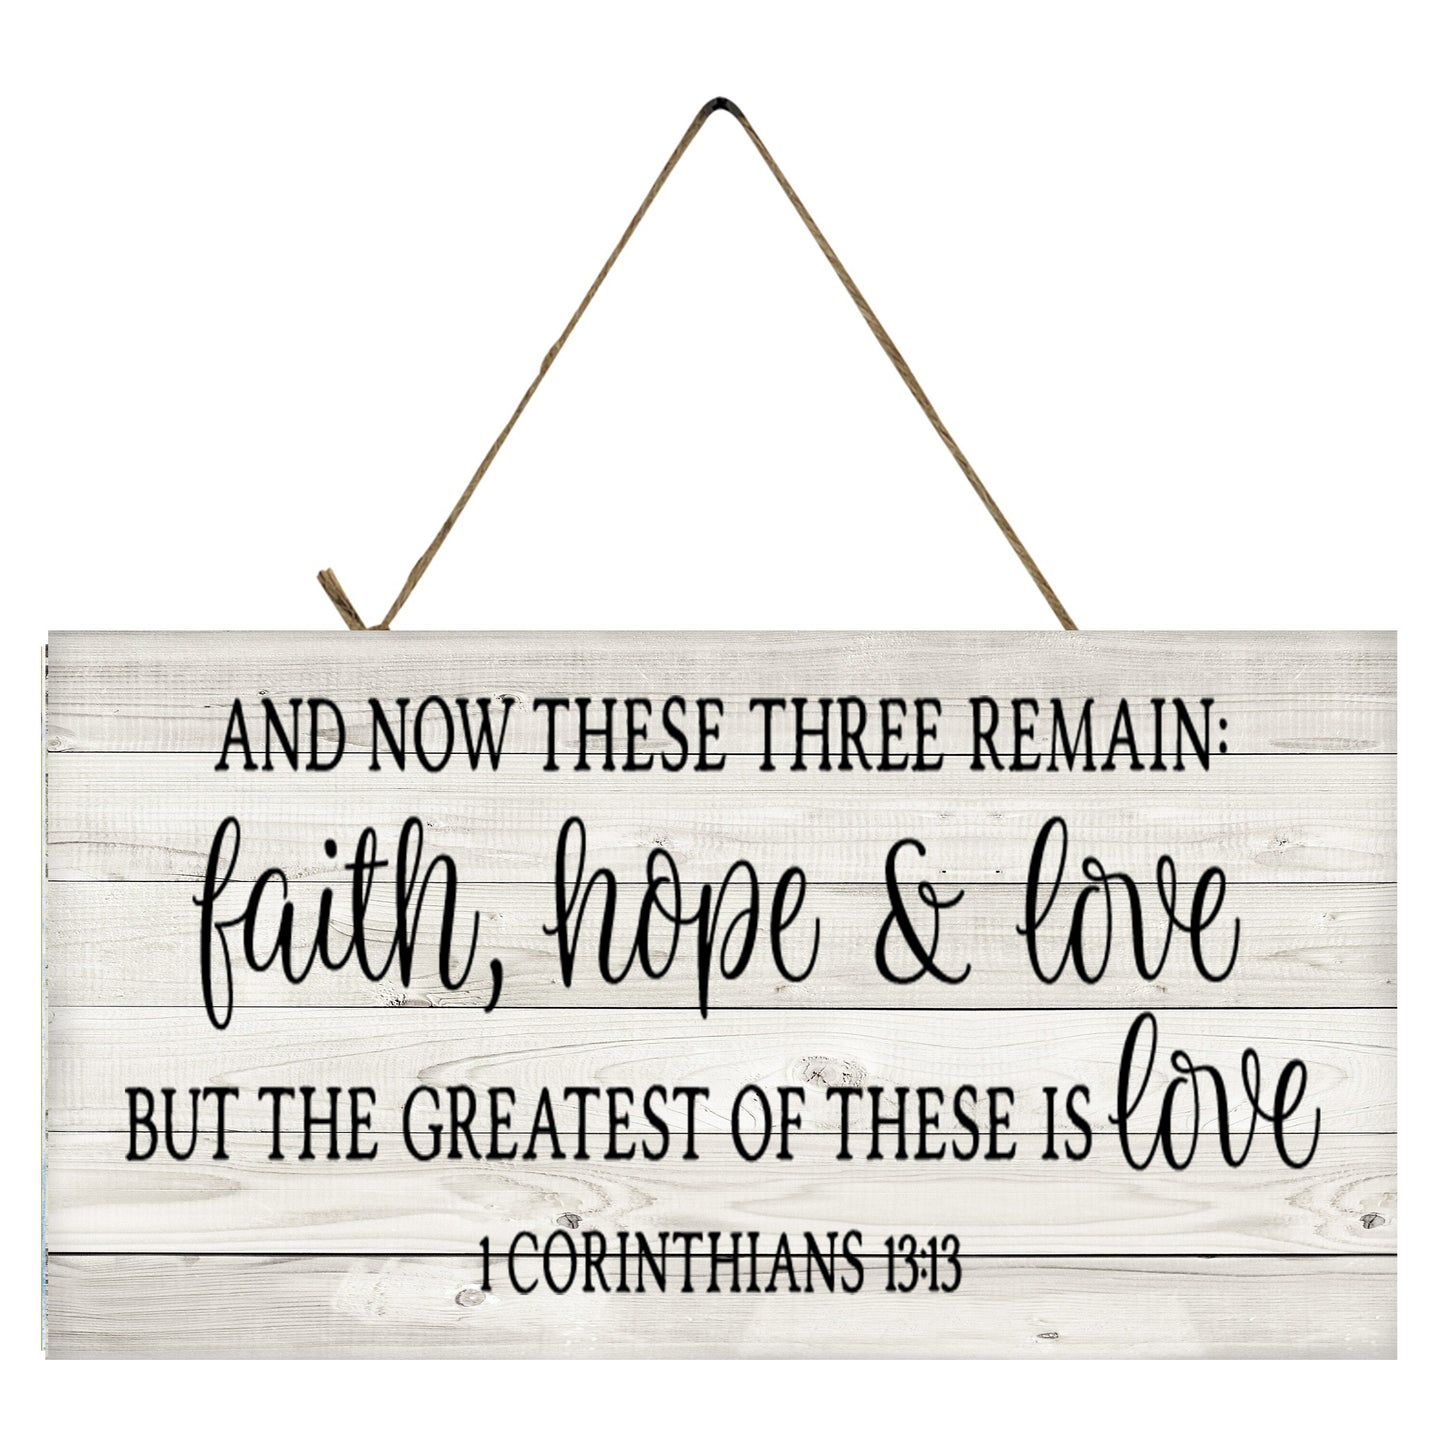 And Now These Three Remain Faith Hope & Love But the Greatest of These is Love 1 Corinthians 13:13 Printed Handmade Wood Sign